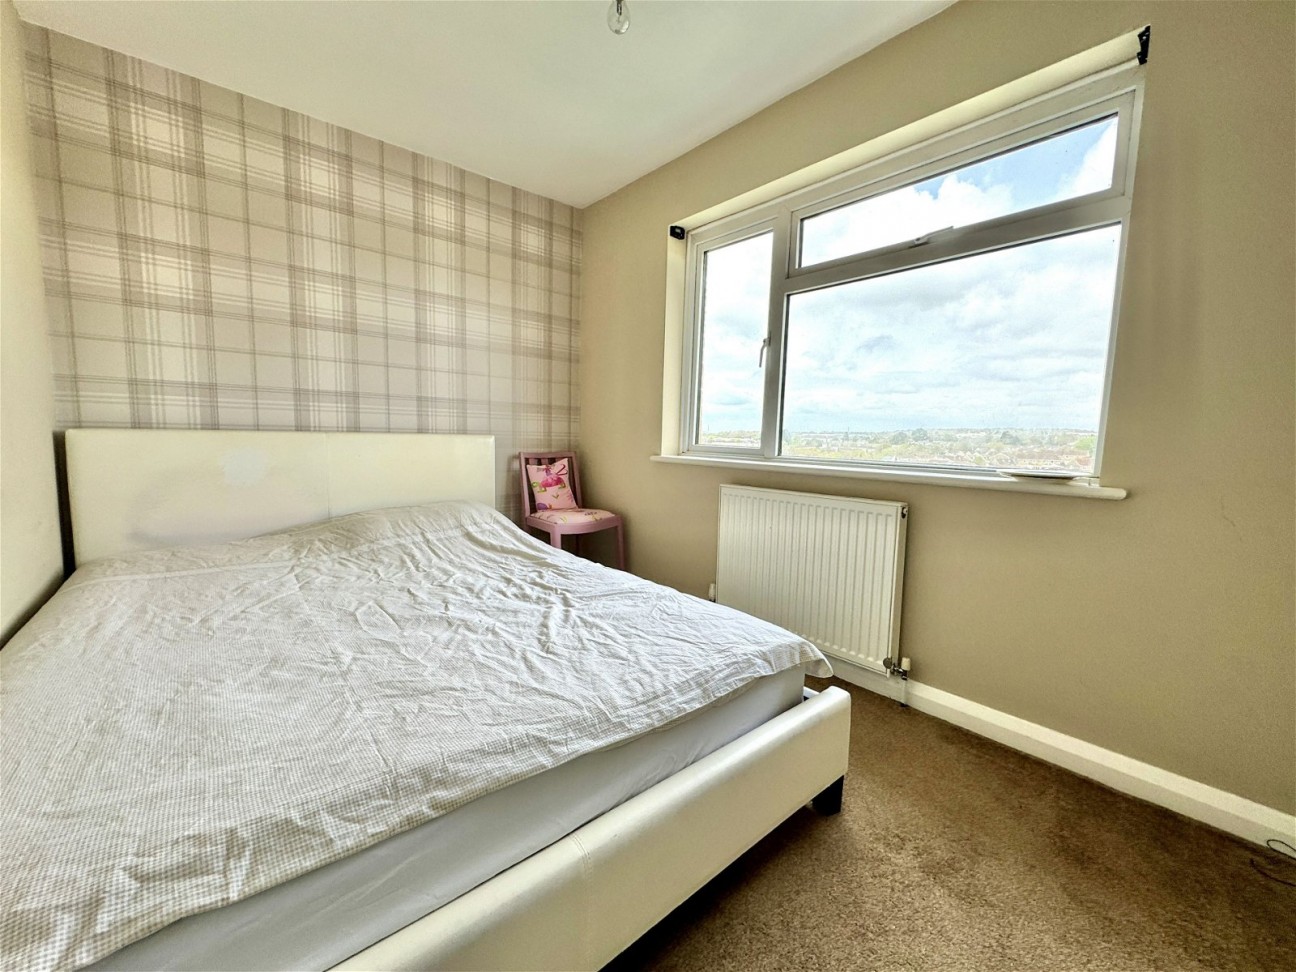 Moorland View, Derriford, Plymouth